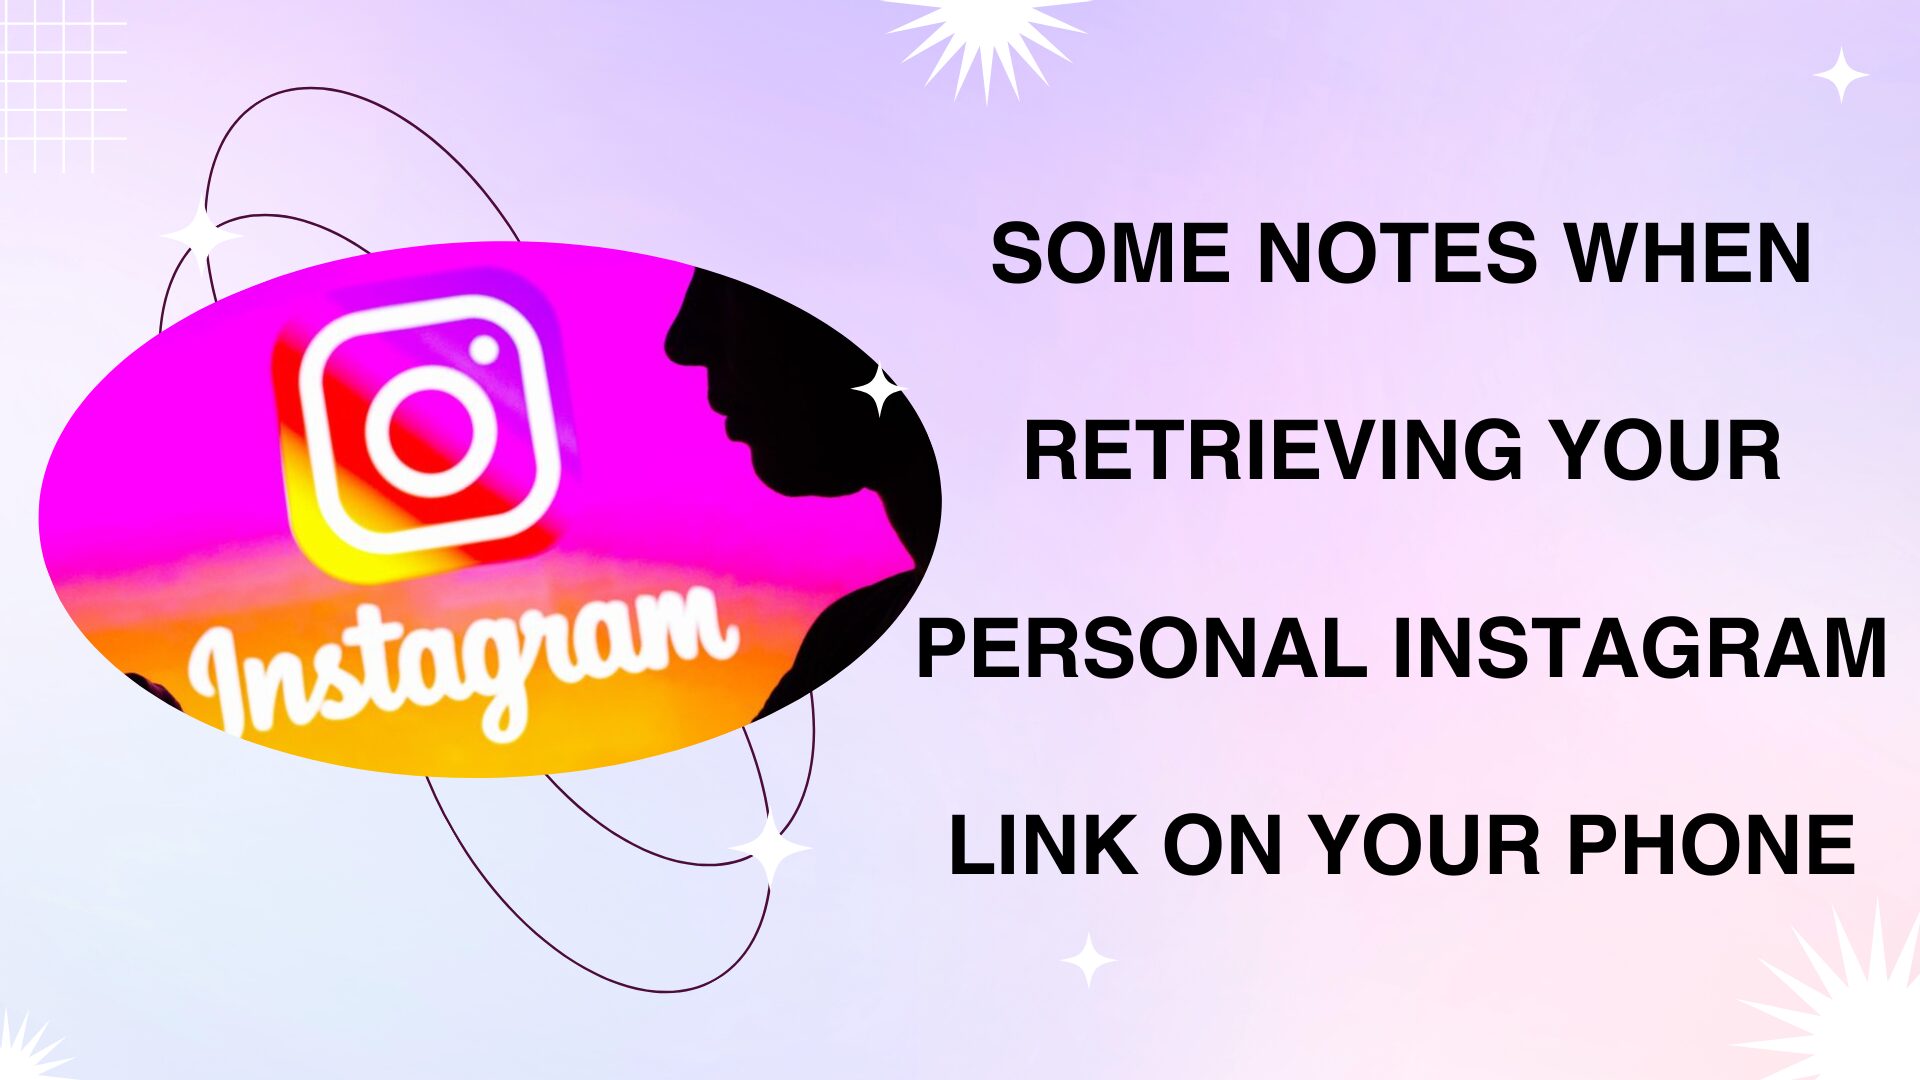 Some notes when retrieving your personal Instagram Link on your phone